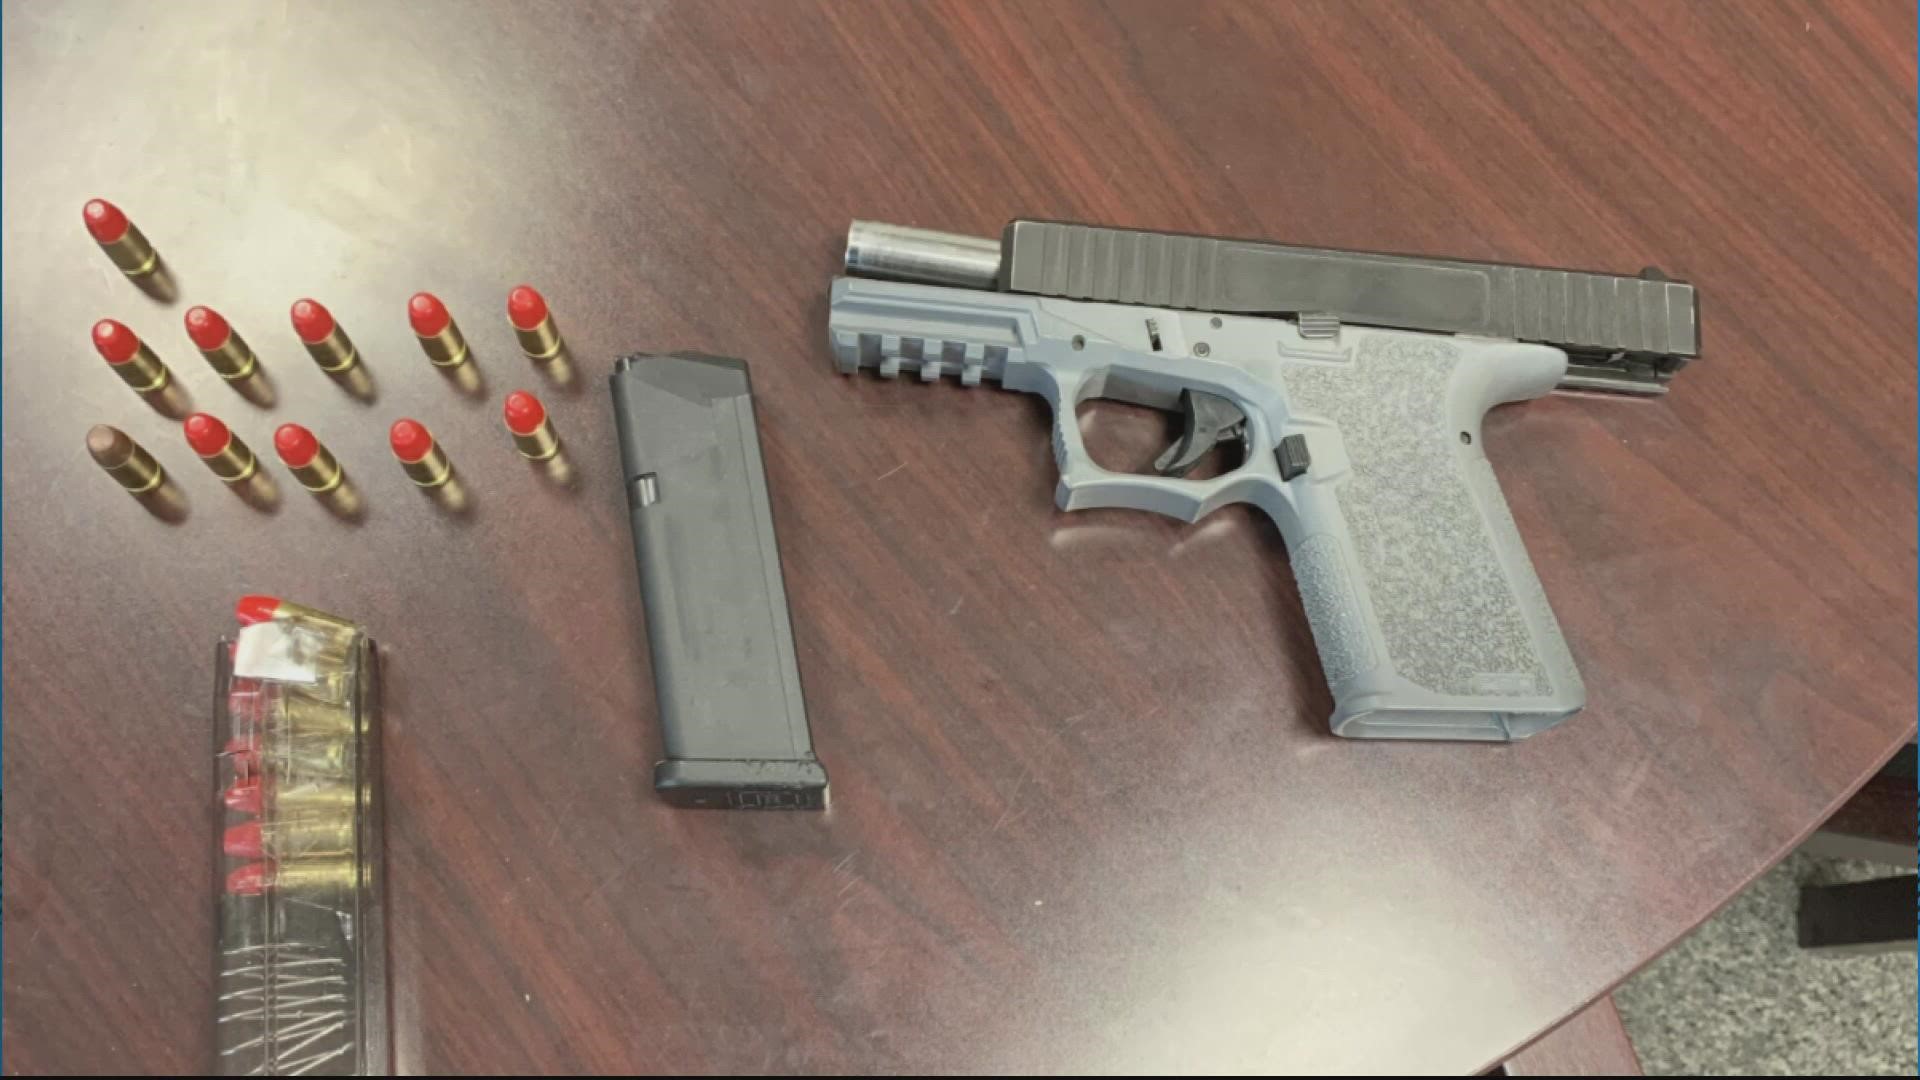 Anne Arundel County police announced a 12-year-old is accused of bringing this gun and ammunition to school yesterday.